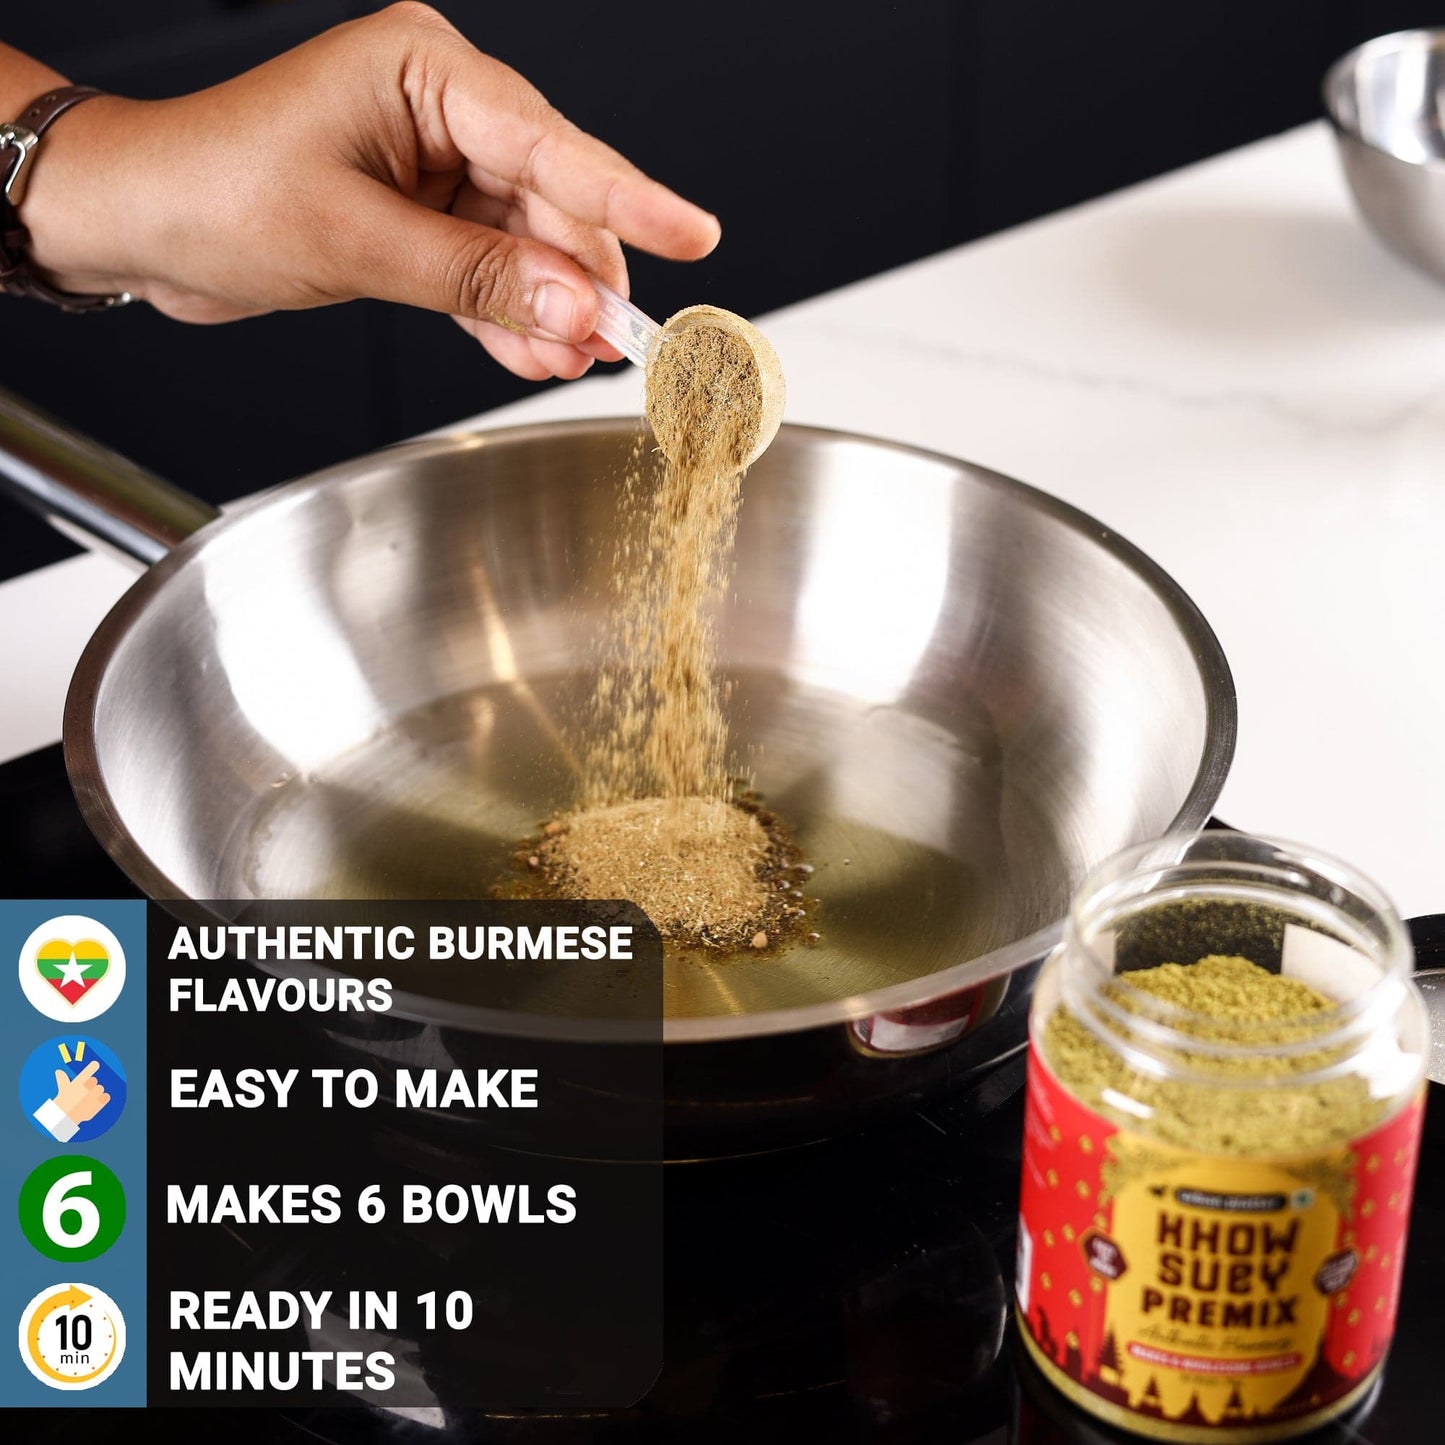 Urban Platter Khow Suey Premix, 120g (Easy to Make | Authentic Burmese Flavours | Khow Suey Curry| Makes 6 Wholesome Bowls)